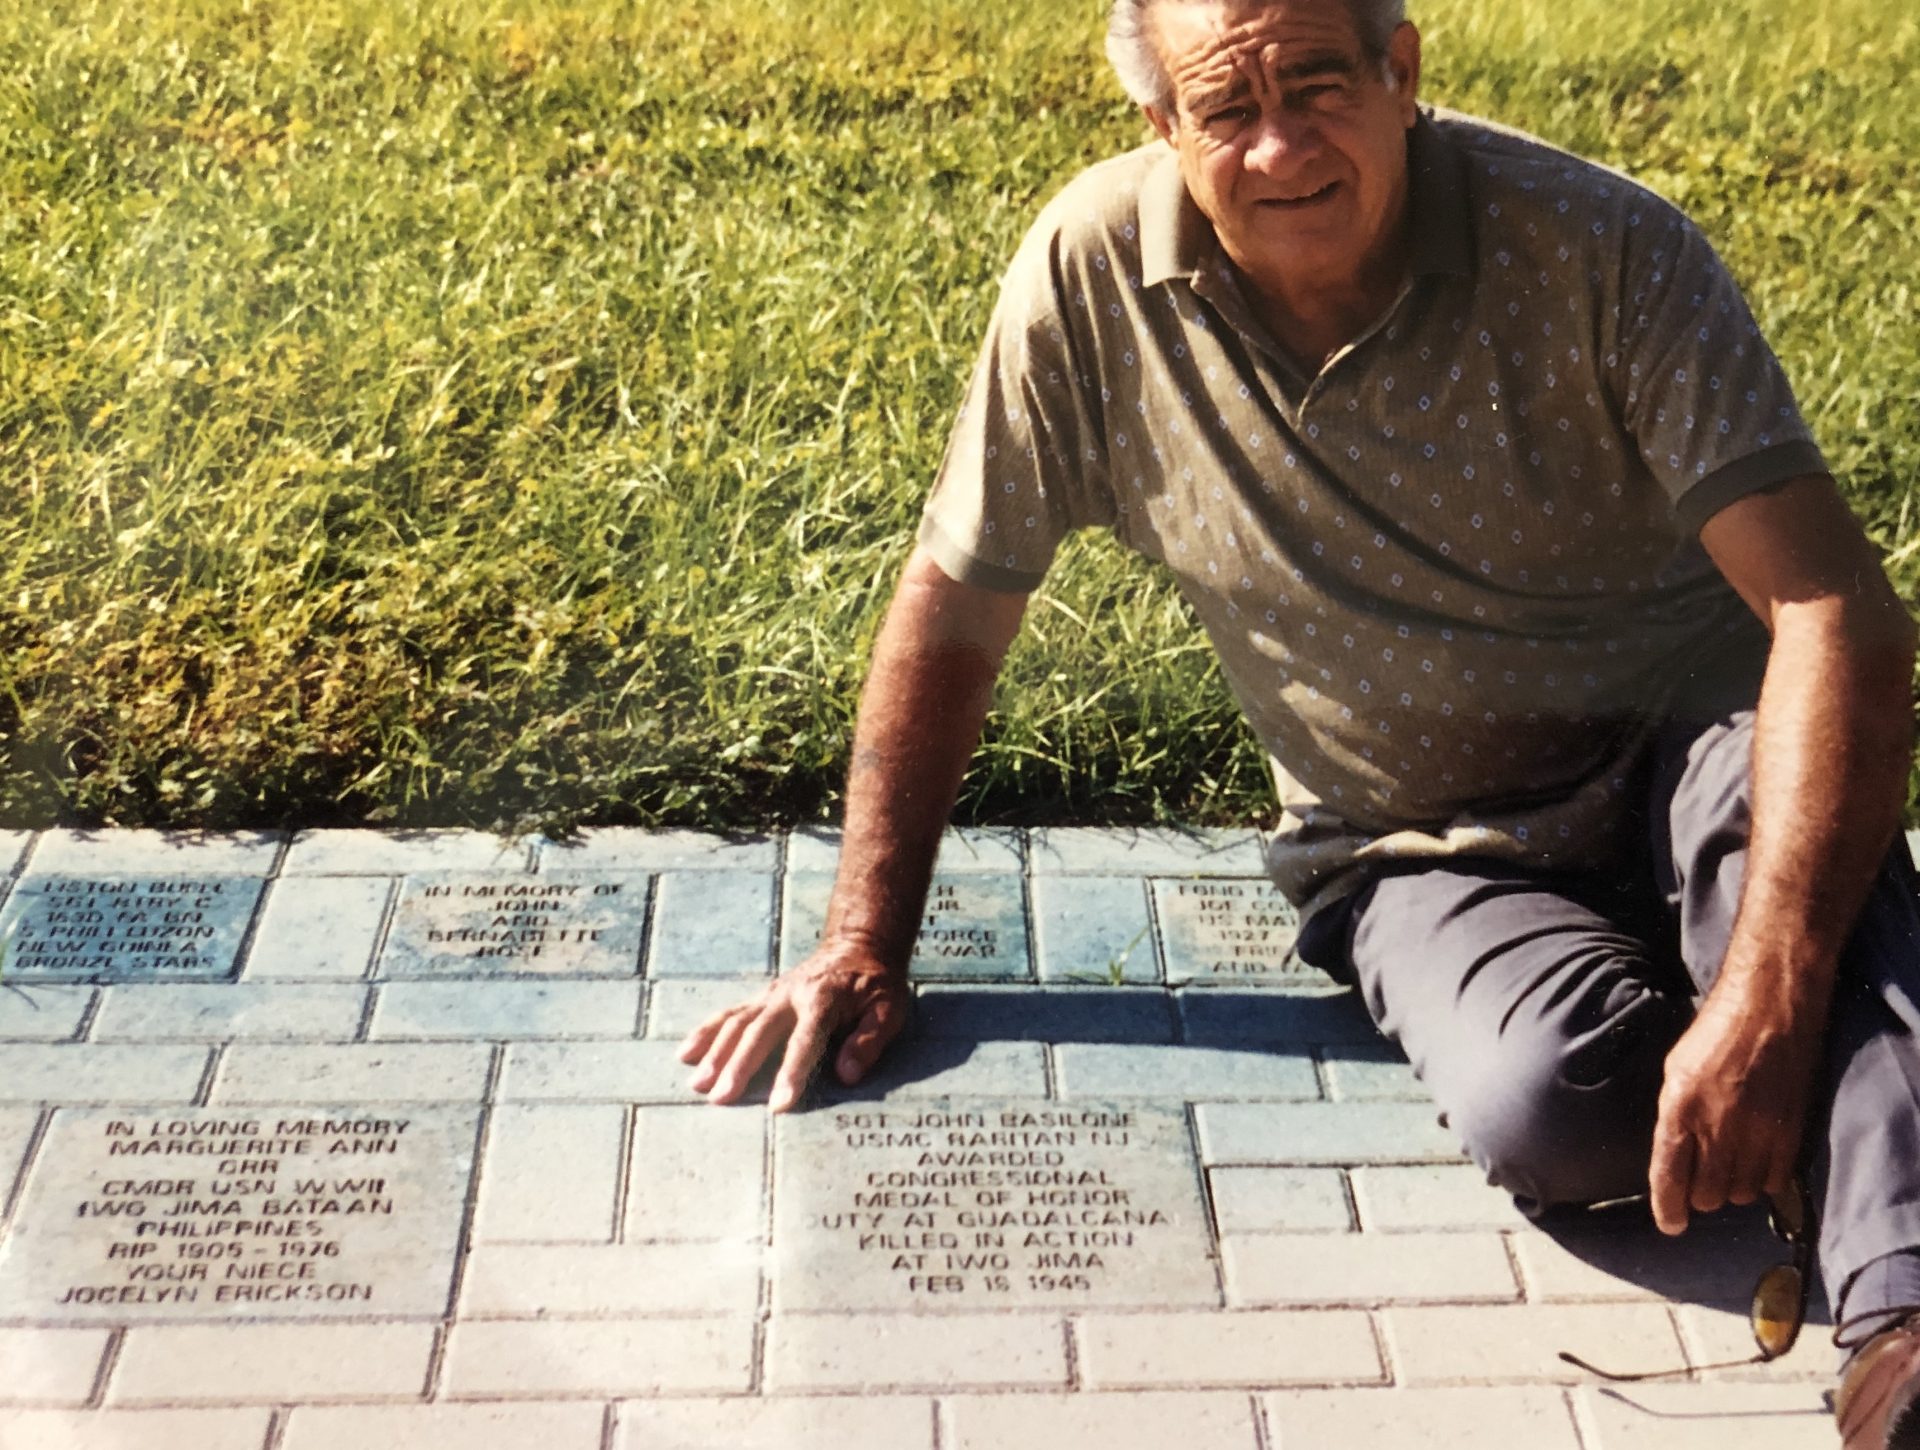 My dad by the John Basilone memorial brick in Cape Coral